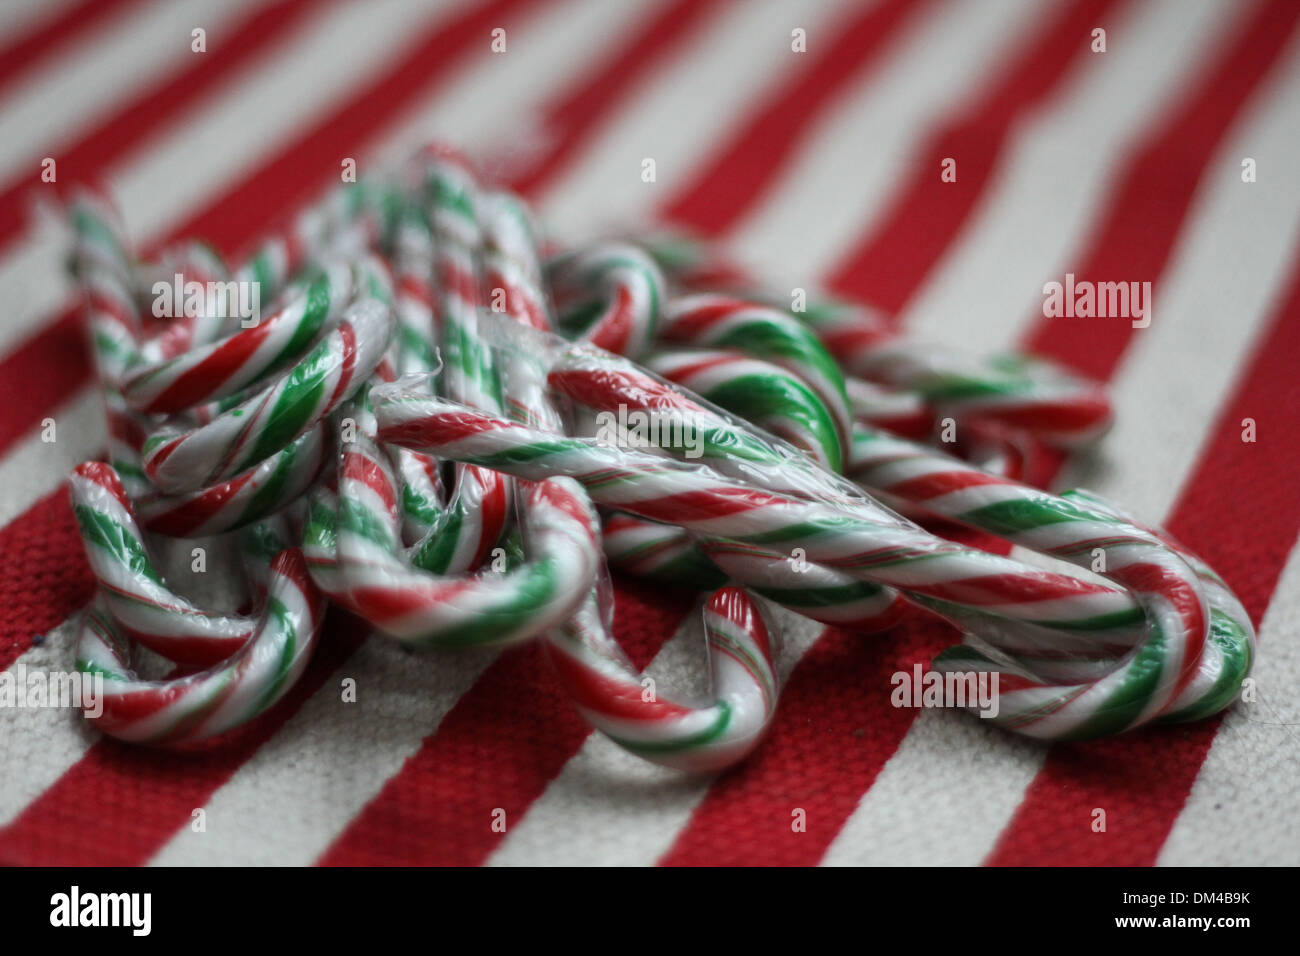 Candy Canes are a traditional sweet treat during the Christmas season. Stock Photo